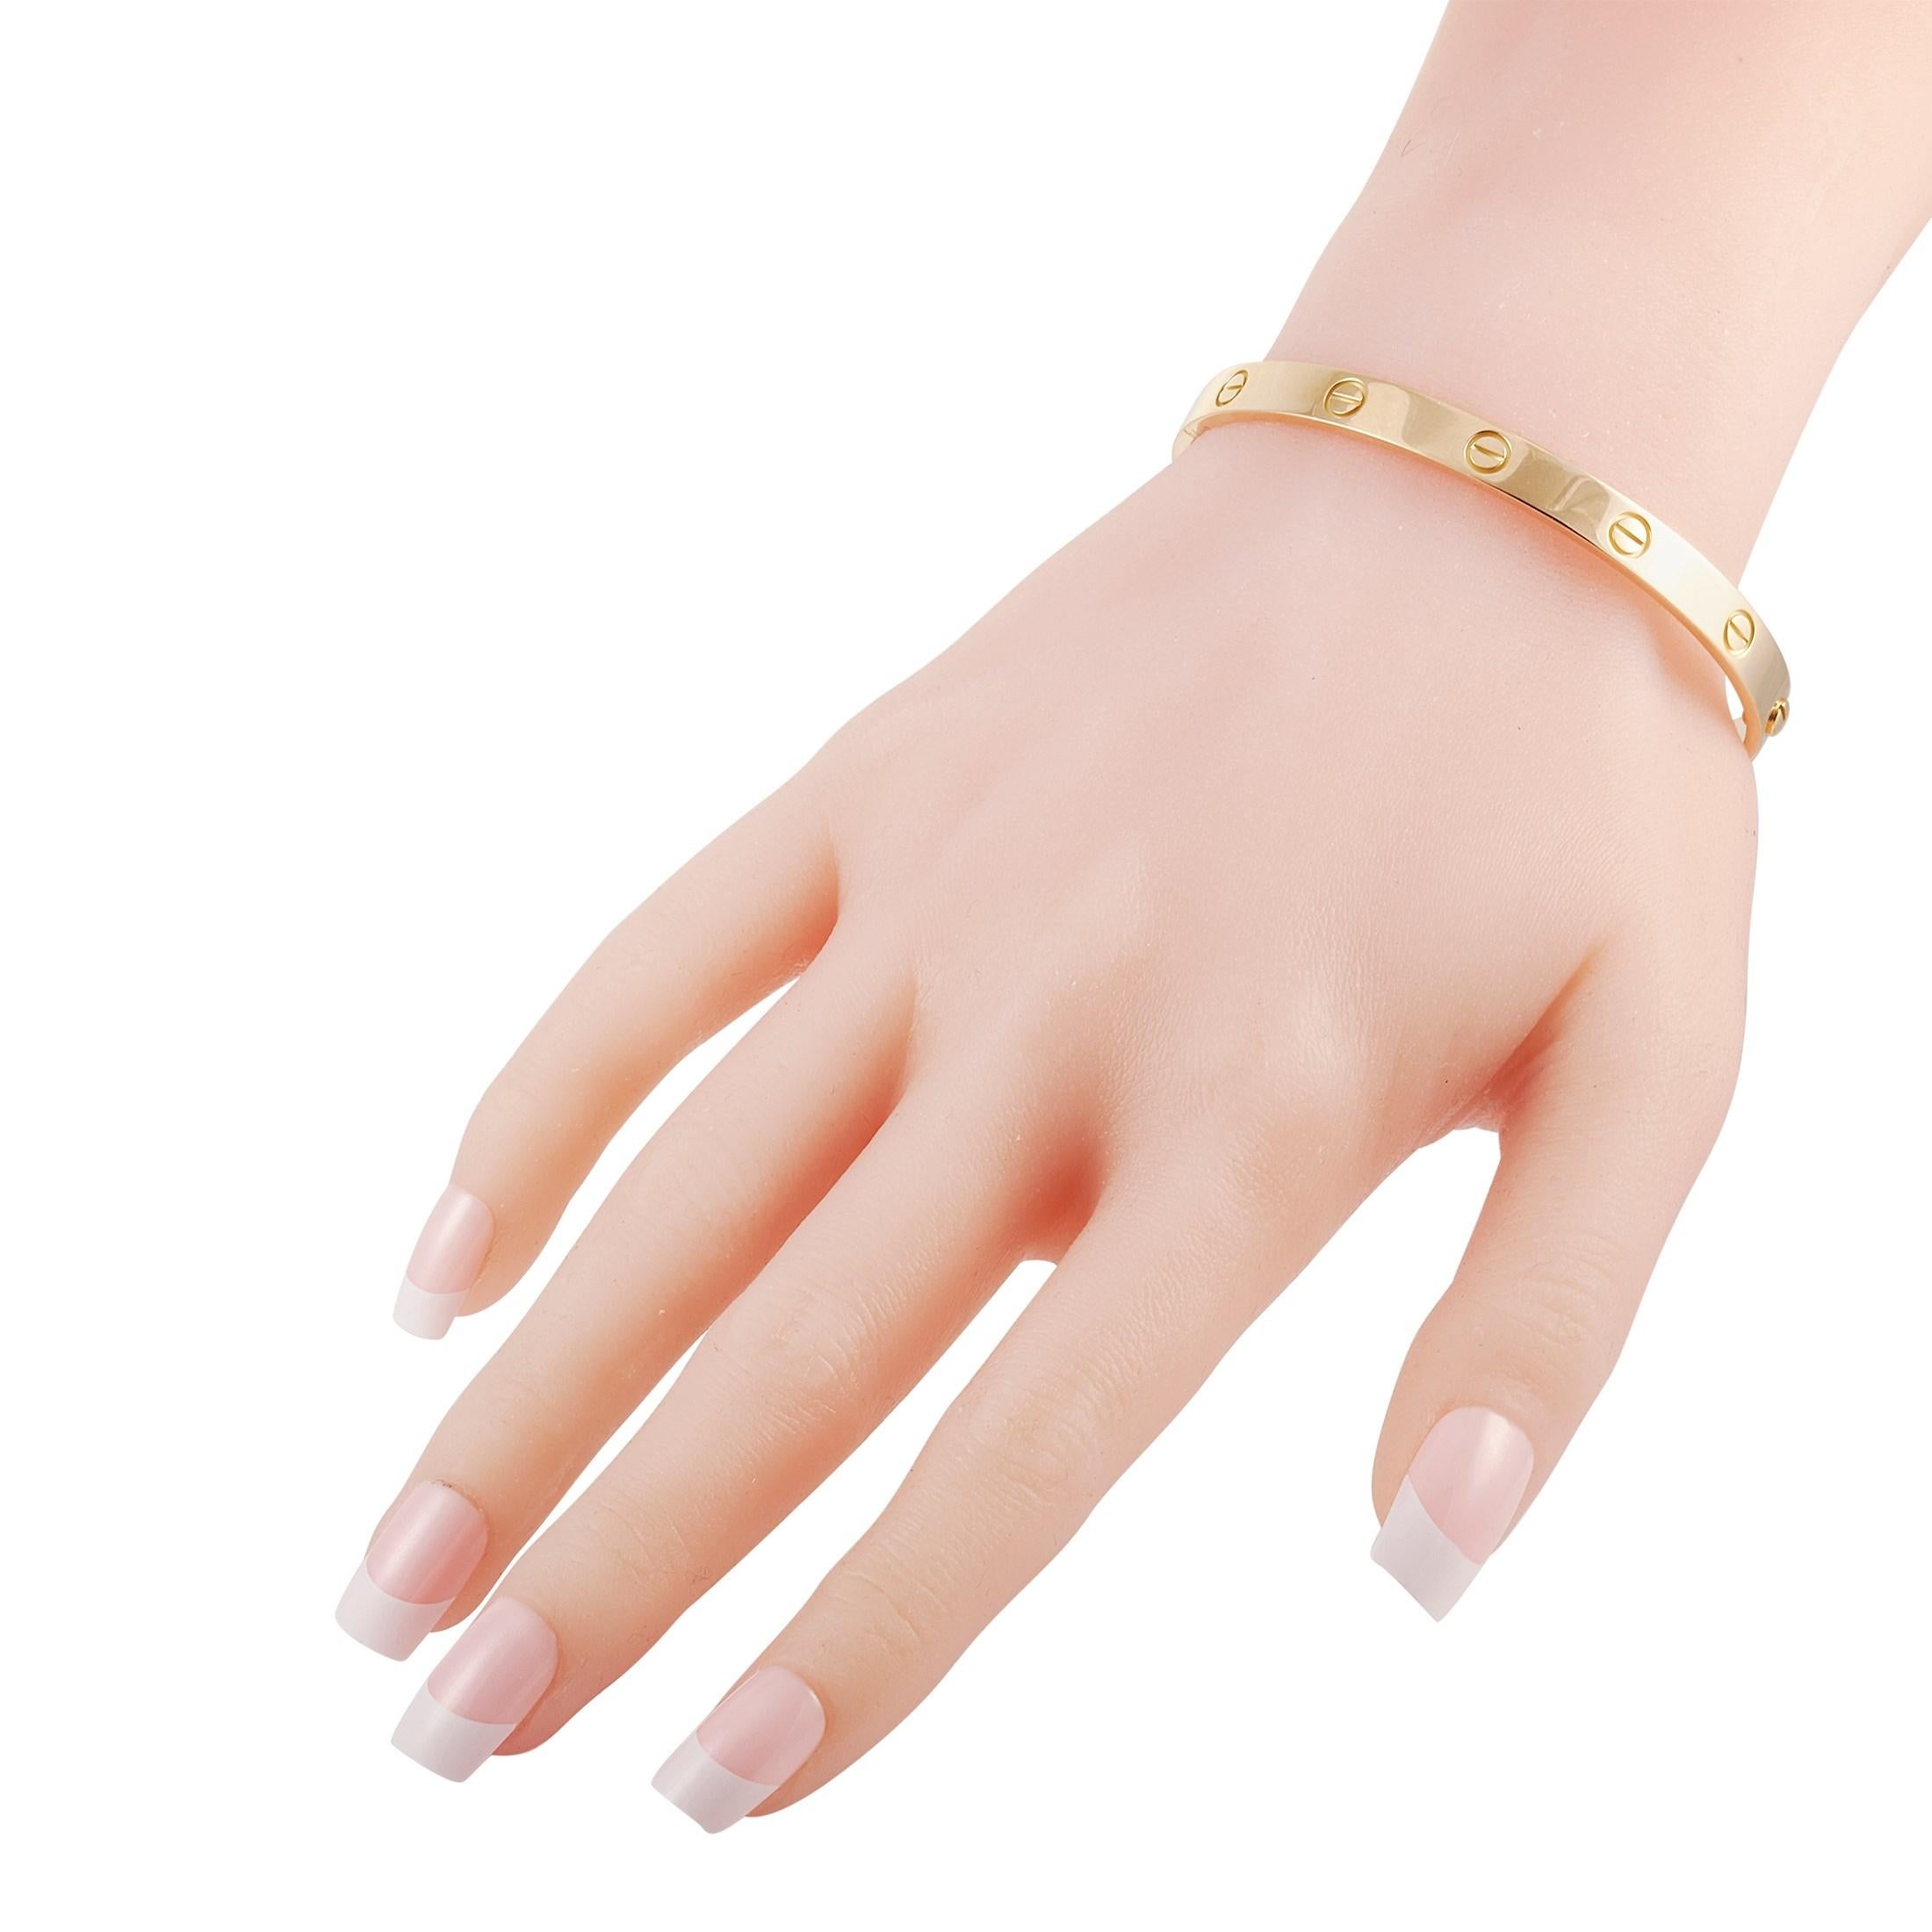 This Cartier 18K Yellow Gold Love Bangle Bracelet is made with 18K yellow gold and features the signature Santos de Cartier screws around the bracelet. The bracelet weighs a total of 34.3 grams and has a diameter of 7.85 inches.

This bracelet is